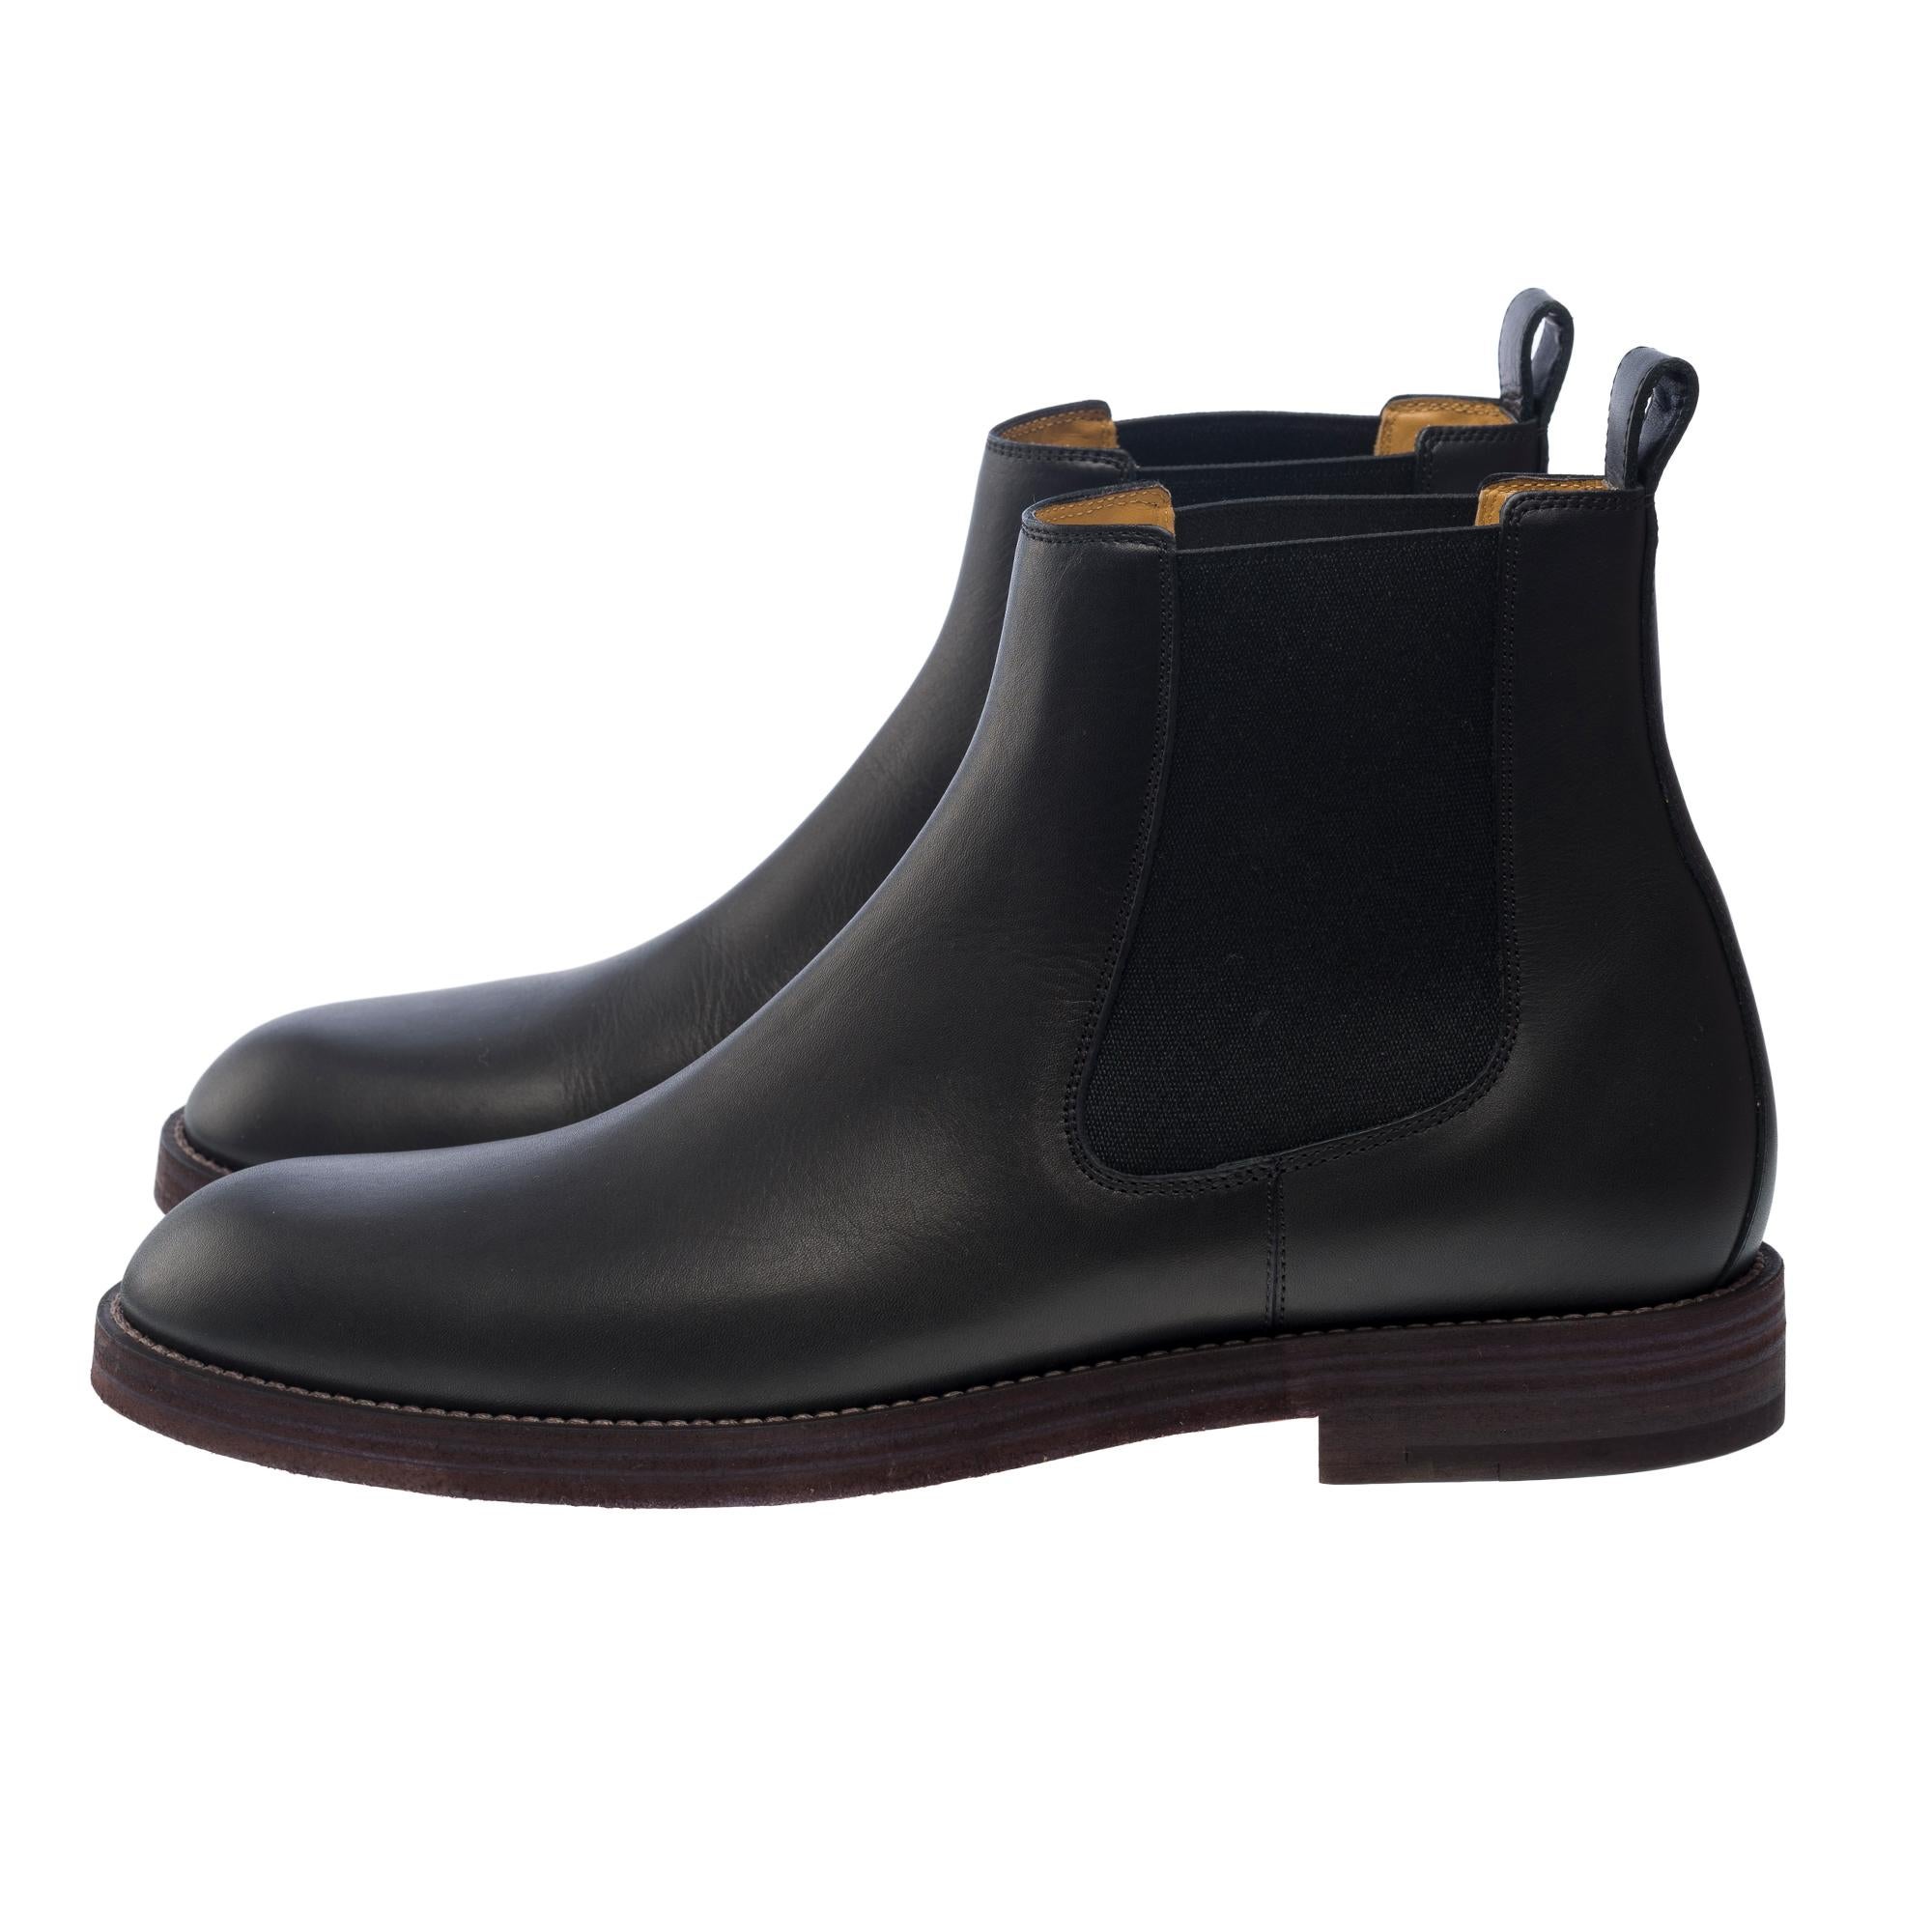 Men's New - Hermès boots for men in black calf leather, Size 44 For Sale